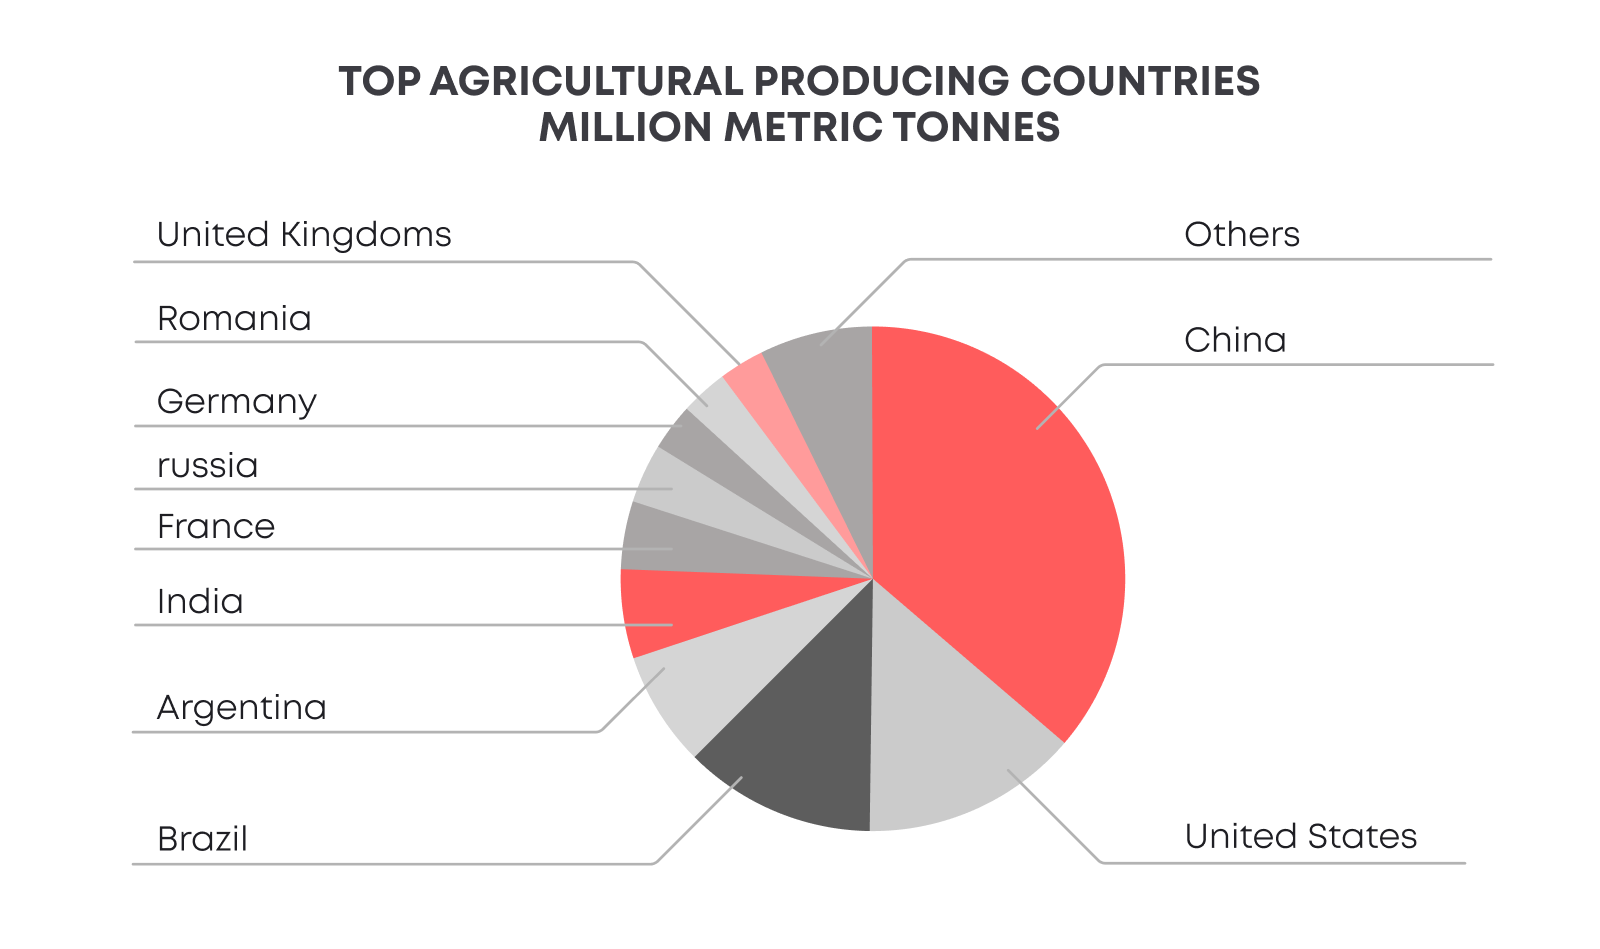 Metrics like land fertility and yield per hectare, central to evaluating agricultural productivity, have varied implications across different regions.